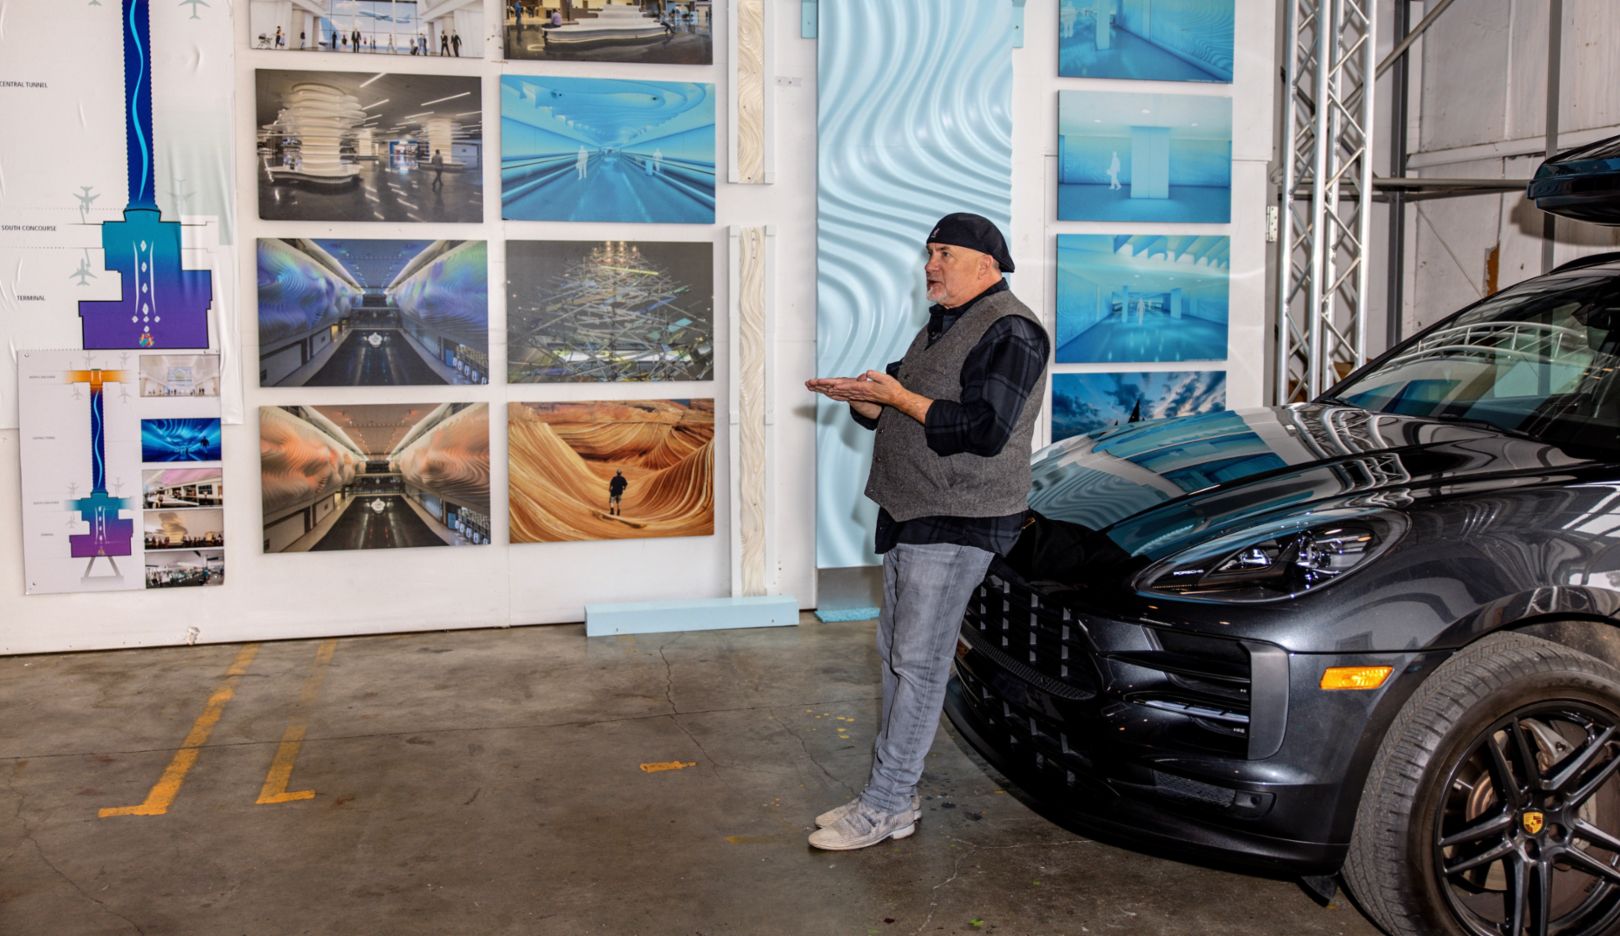 Studio parking space: Gordon Huether with his Porsche Macan S in front of photographs of his works in Napa, California, USA.